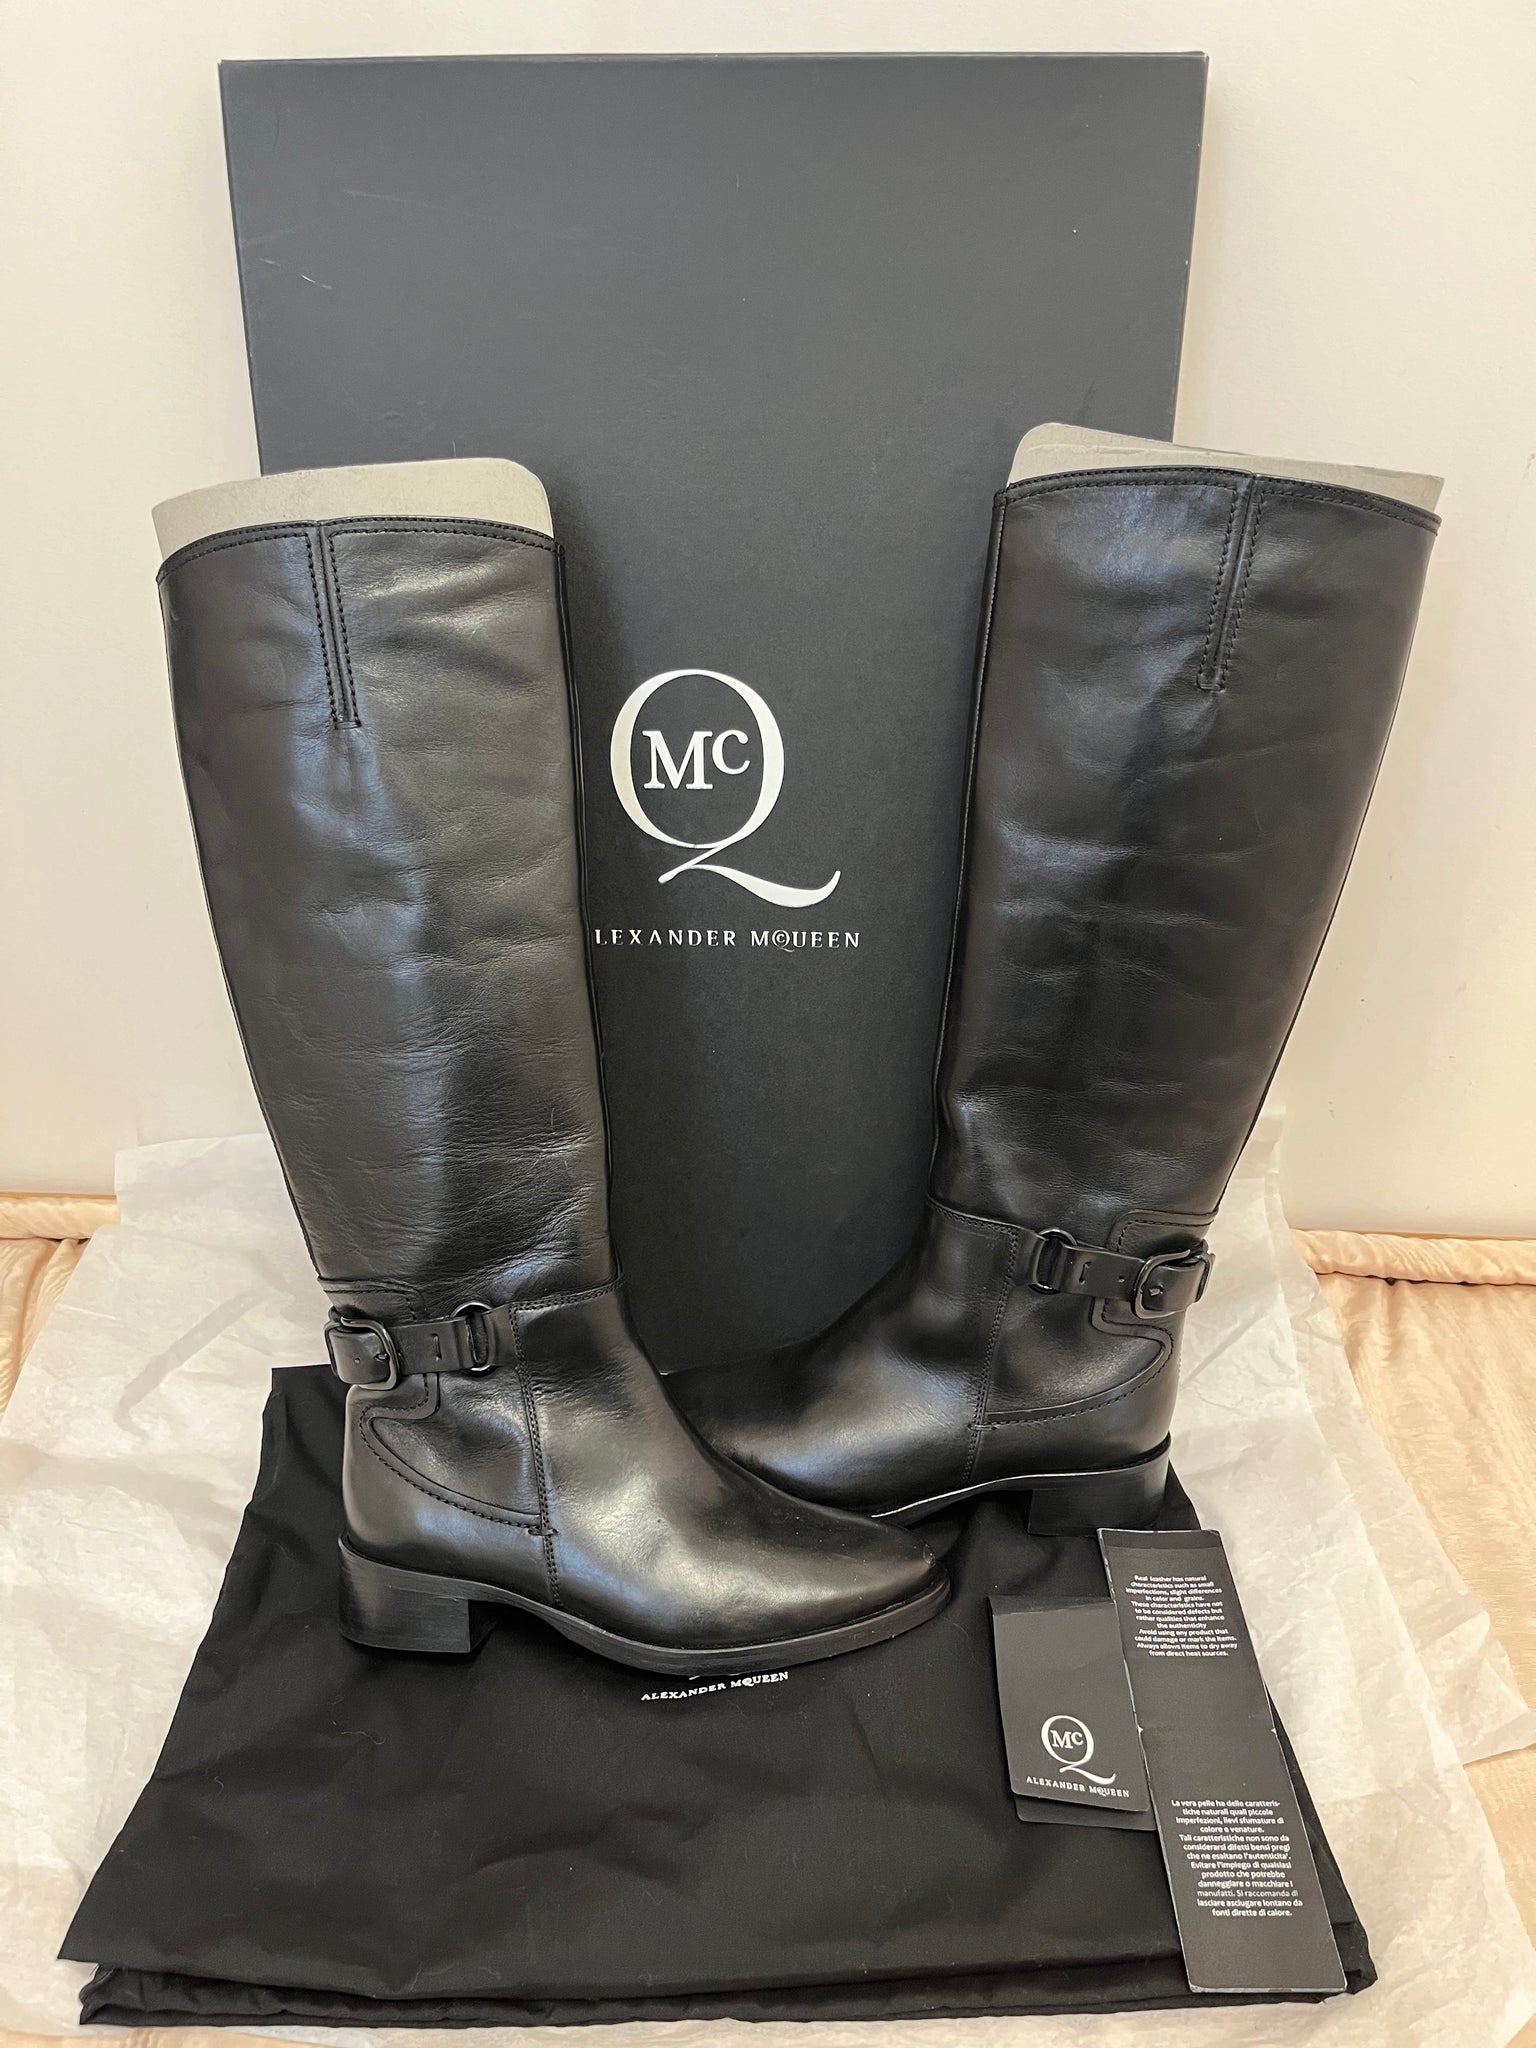 Alexander McQueen Bridal Riding Boots w/Box and Dust Bag 7